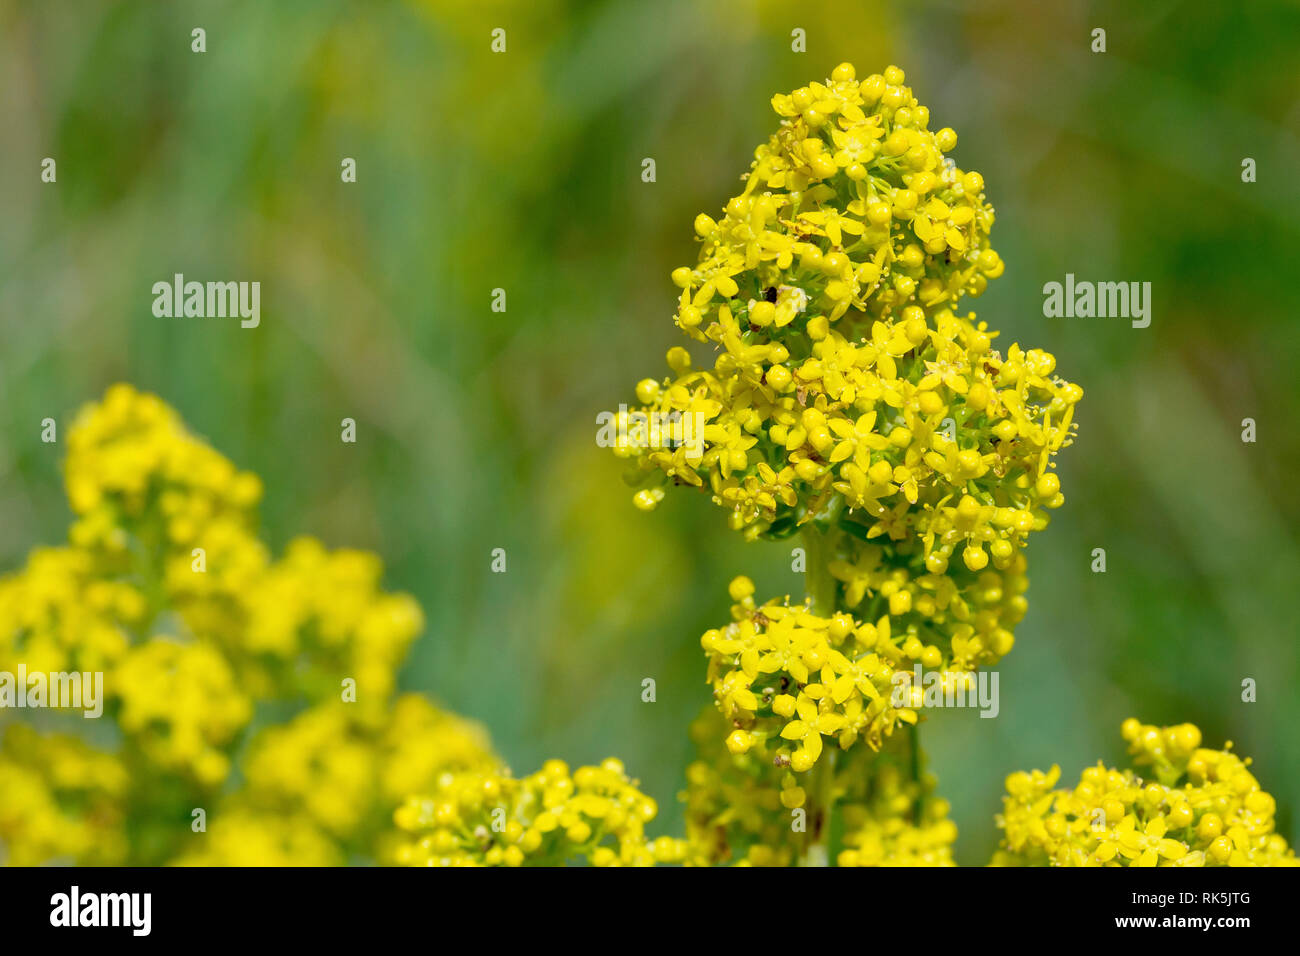 Lady's Bedstraw (galium verum), close up of a cluster of flowers showing detail. Stock Photo